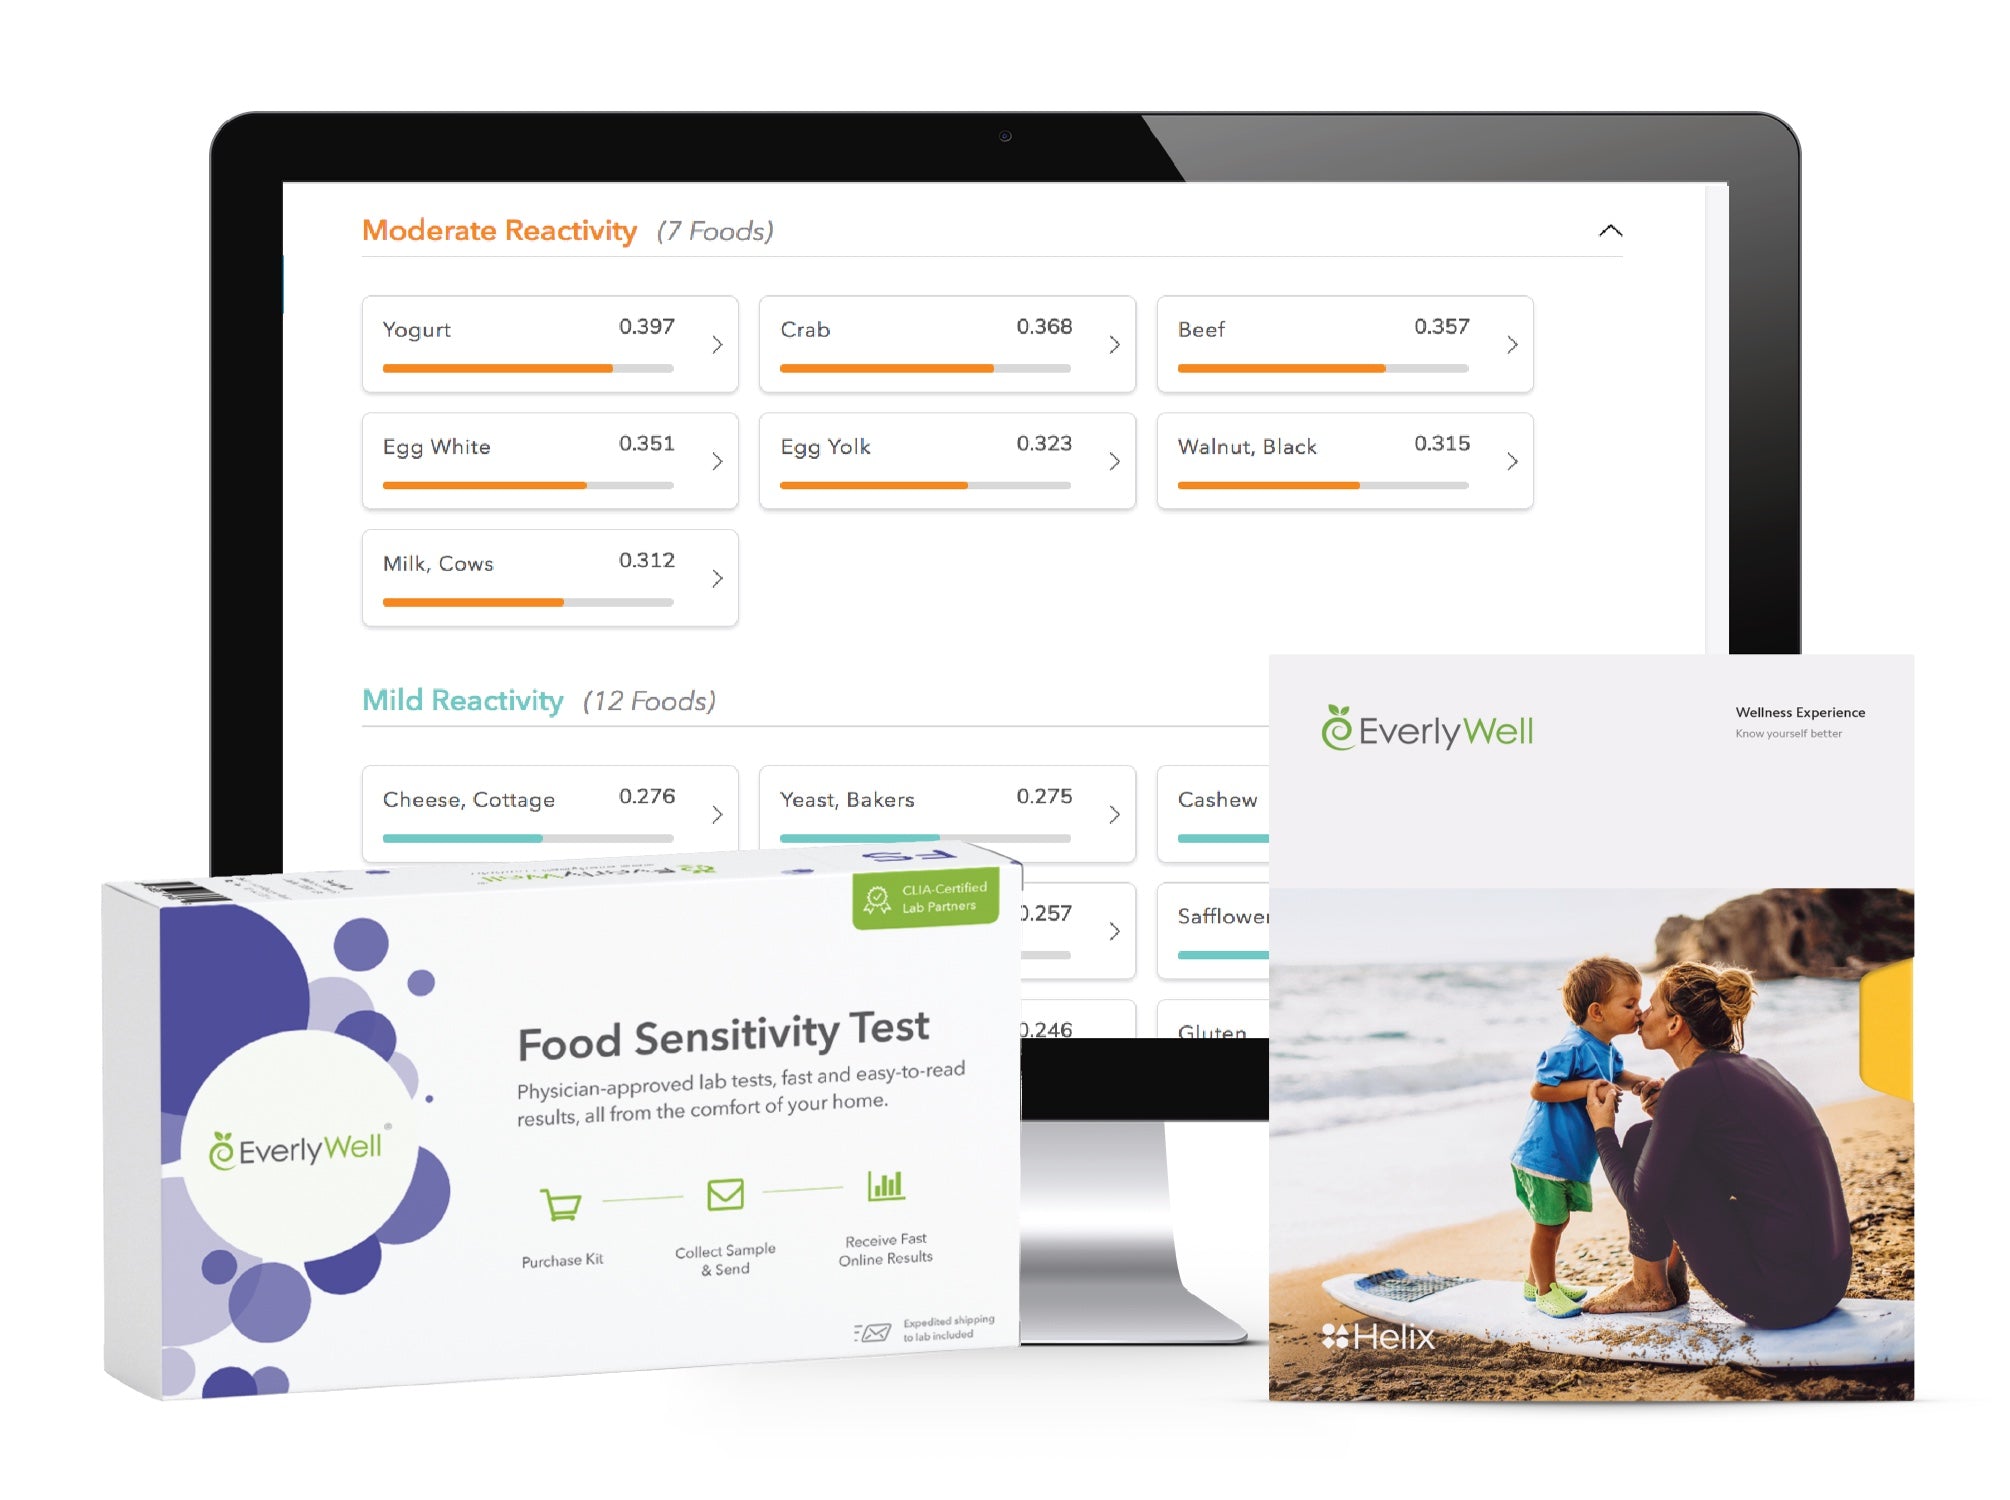 Learn the impact your DNA may have on your metabolism, and measure your sensitivity to common foods with the EverlyWell companion kit.